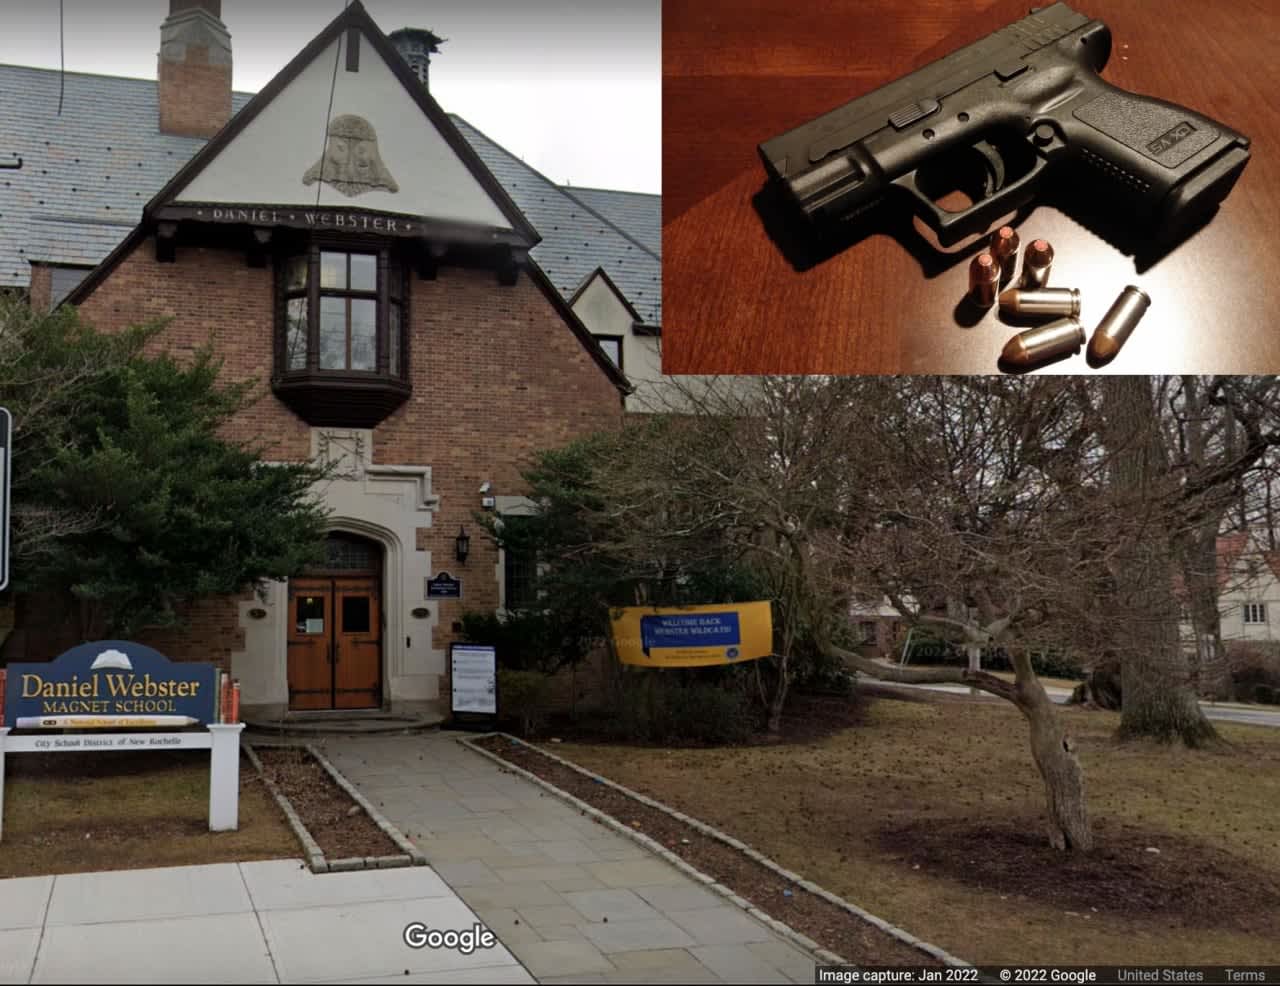 A gun was found buried in dirt and leaves at the Daniel Webster Elementary School in New Rochelle.